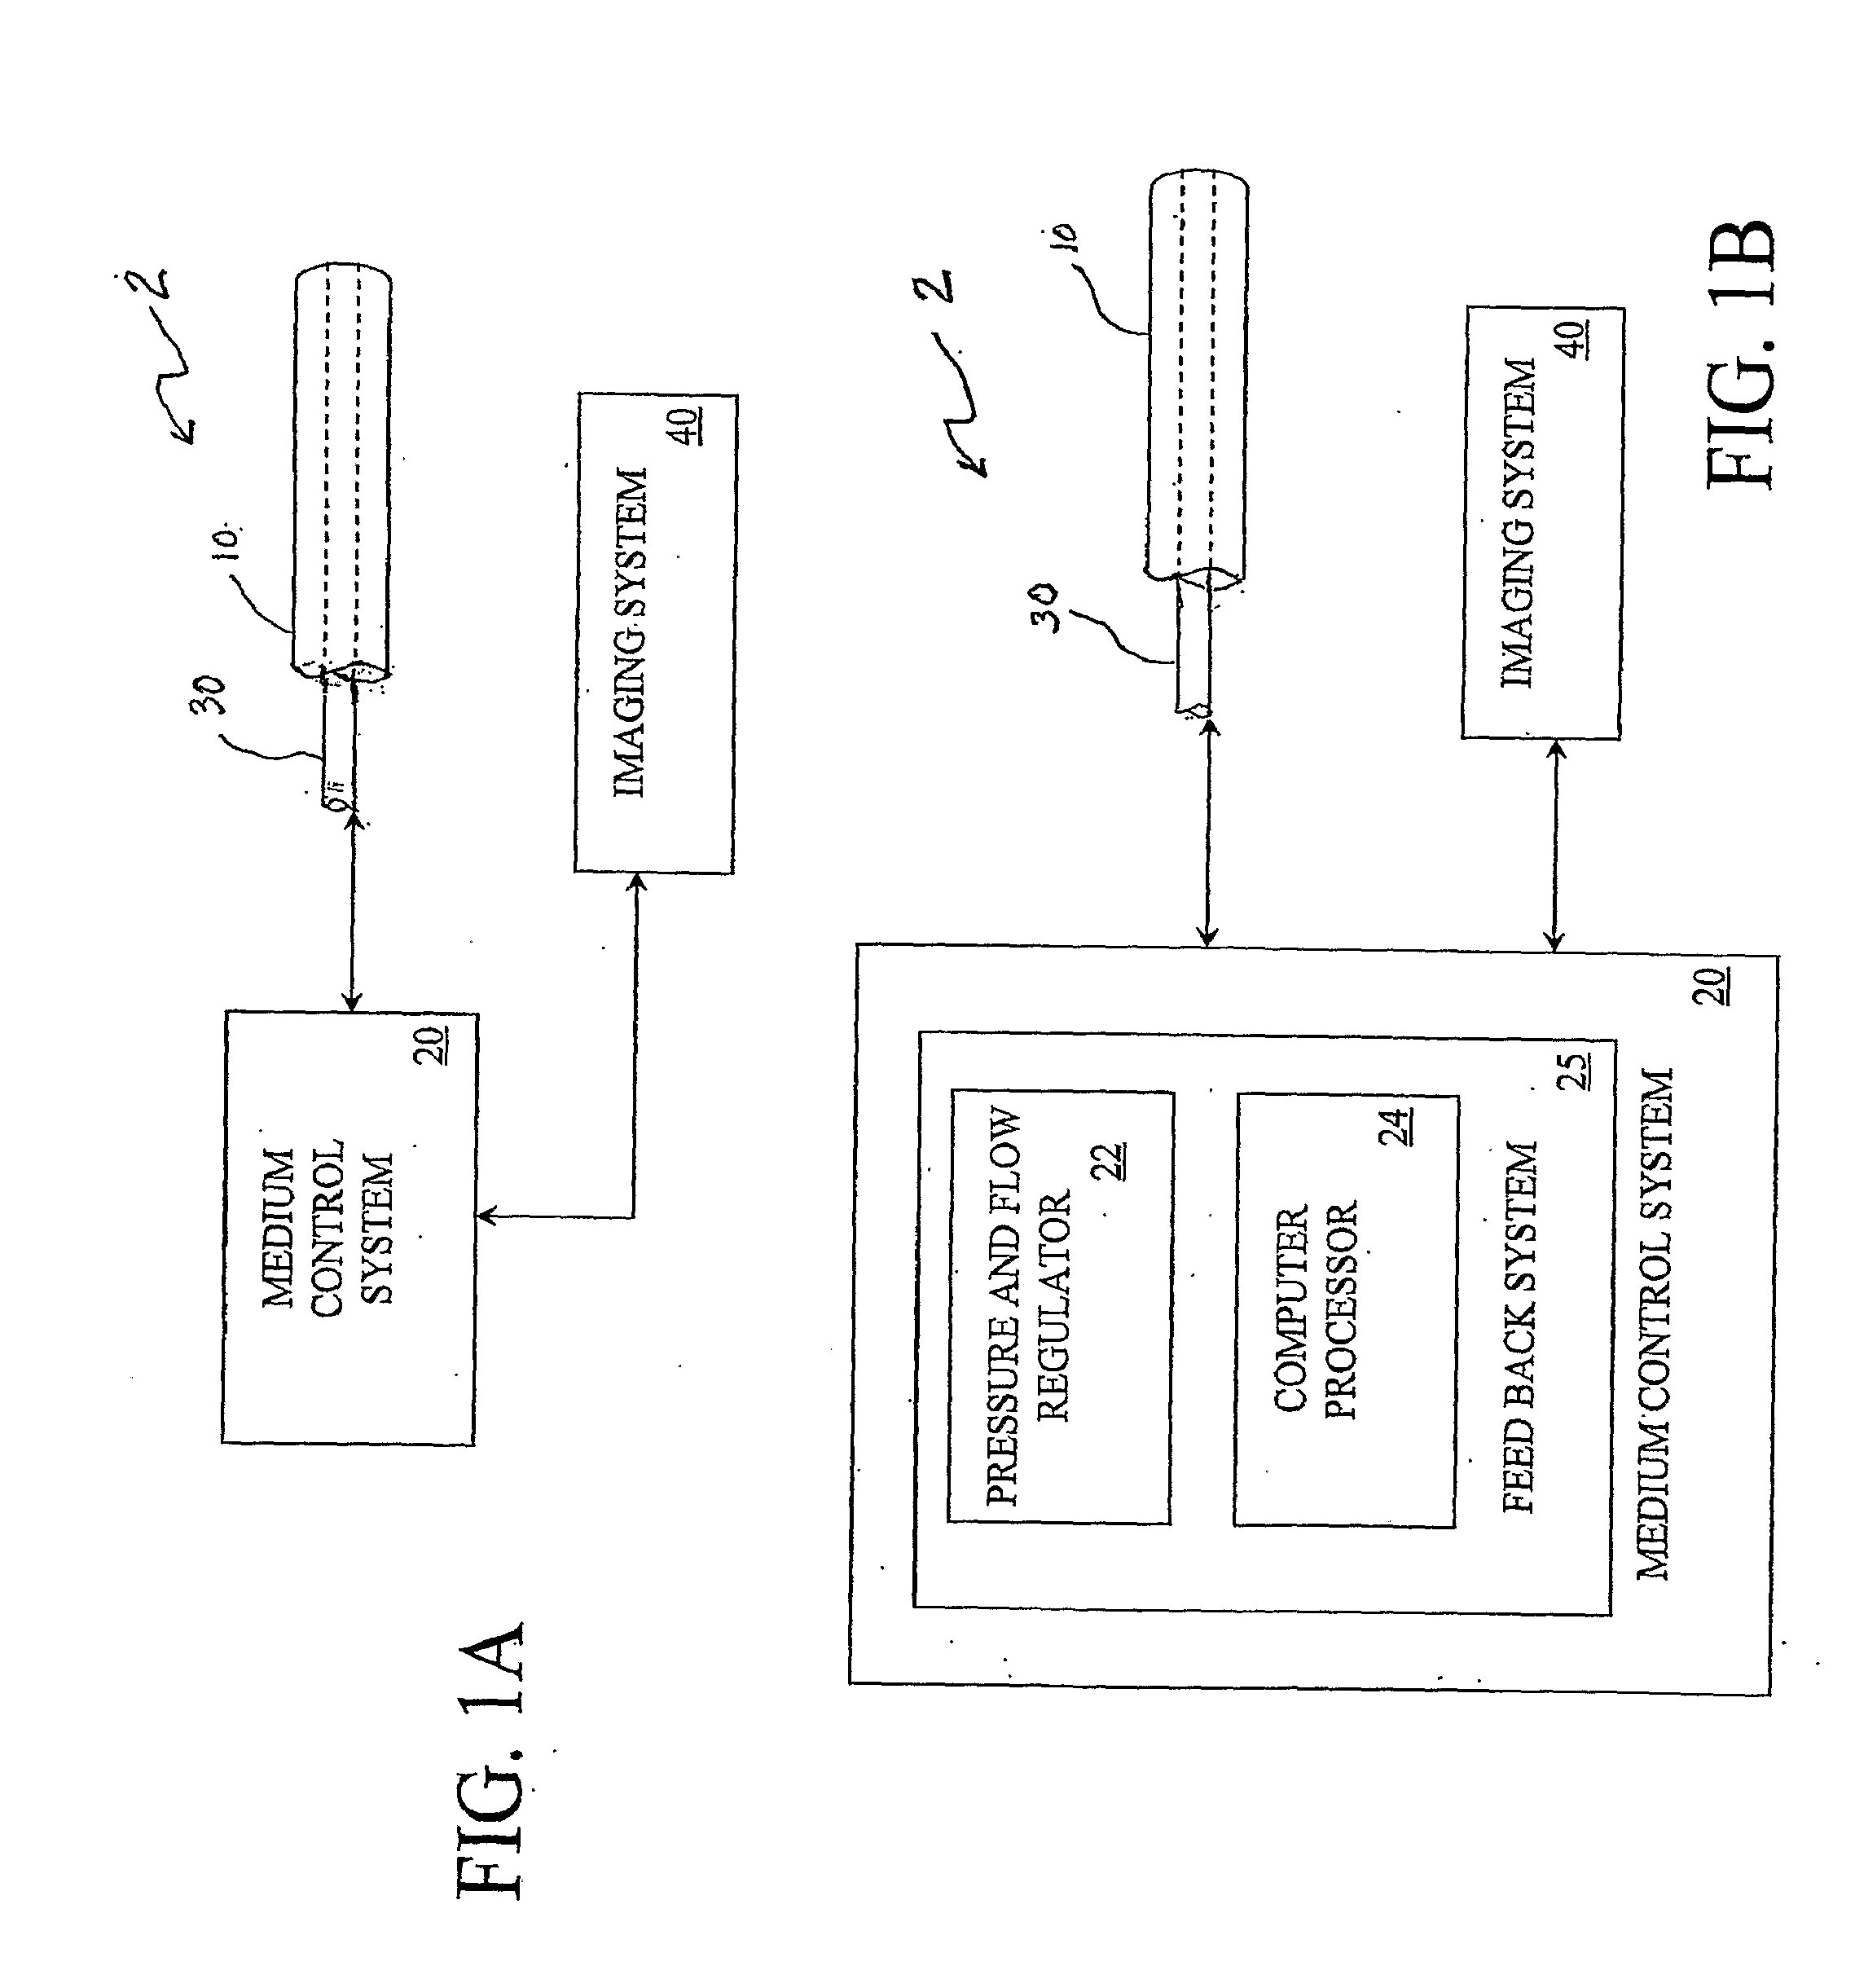 Multi-Port Catheter System with Medium Control and Measurement Systems for Therapy and Diagnosis Delivery